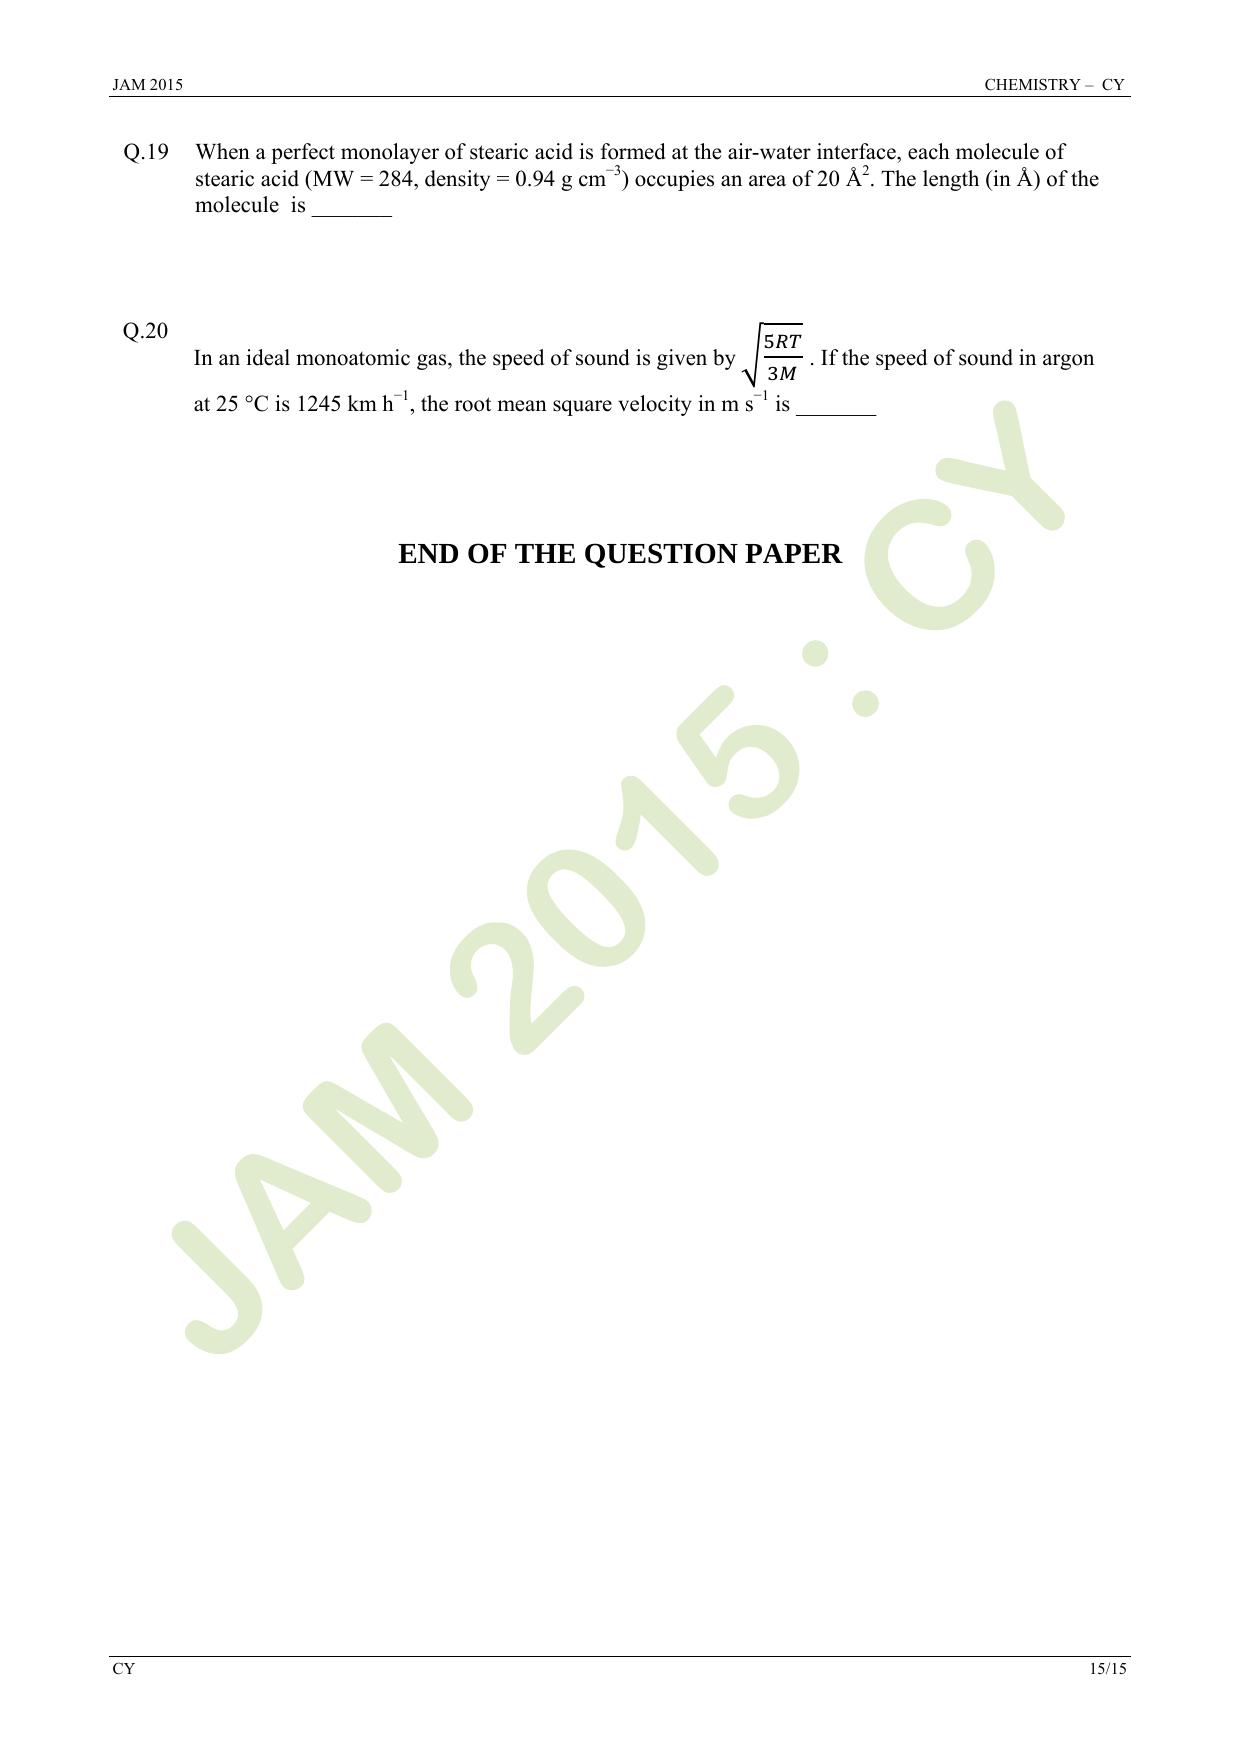 JAM 2015: CY Question Paper - Page 15